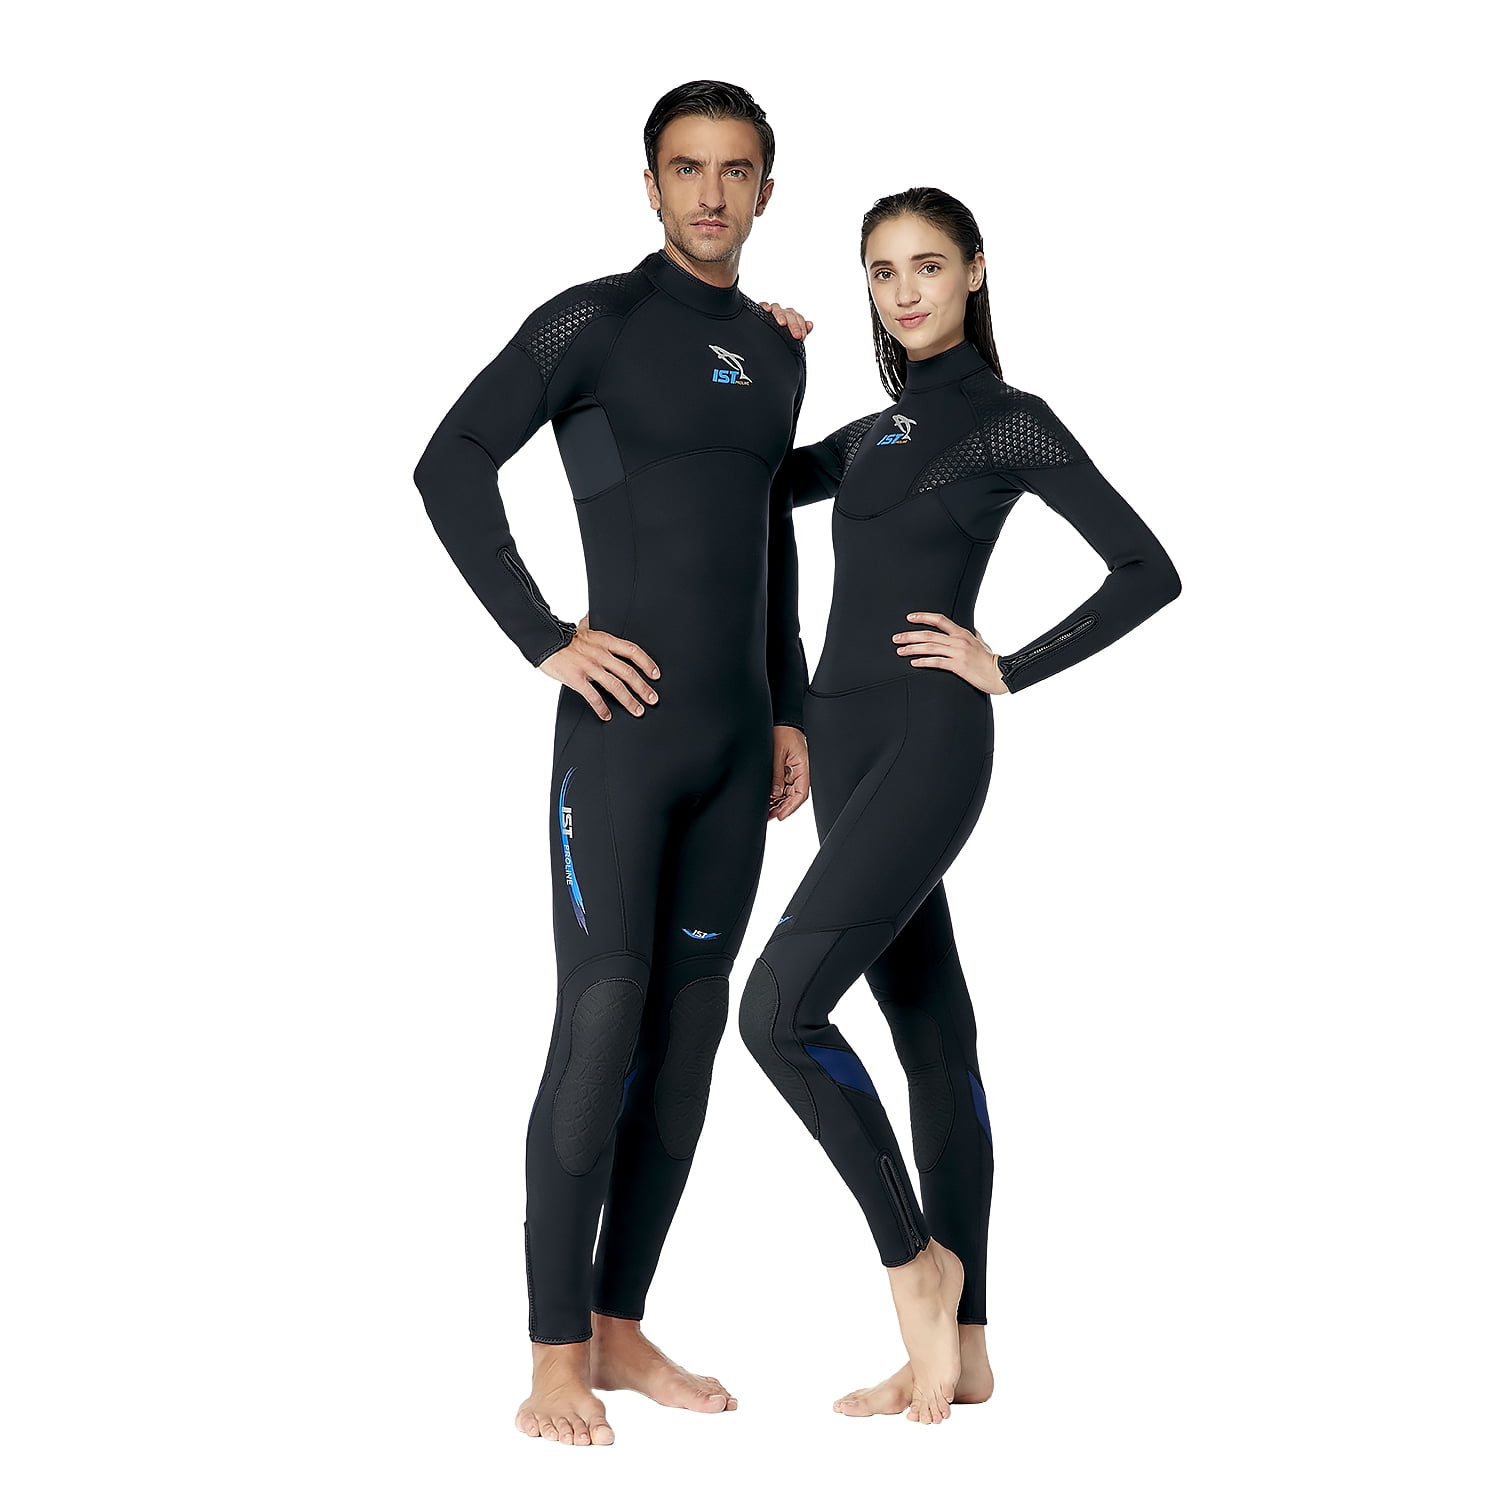 IST WS8 3mm 5mm 7mm Premium Diving Jumpsuit with Super-Stretch Panels for Men 